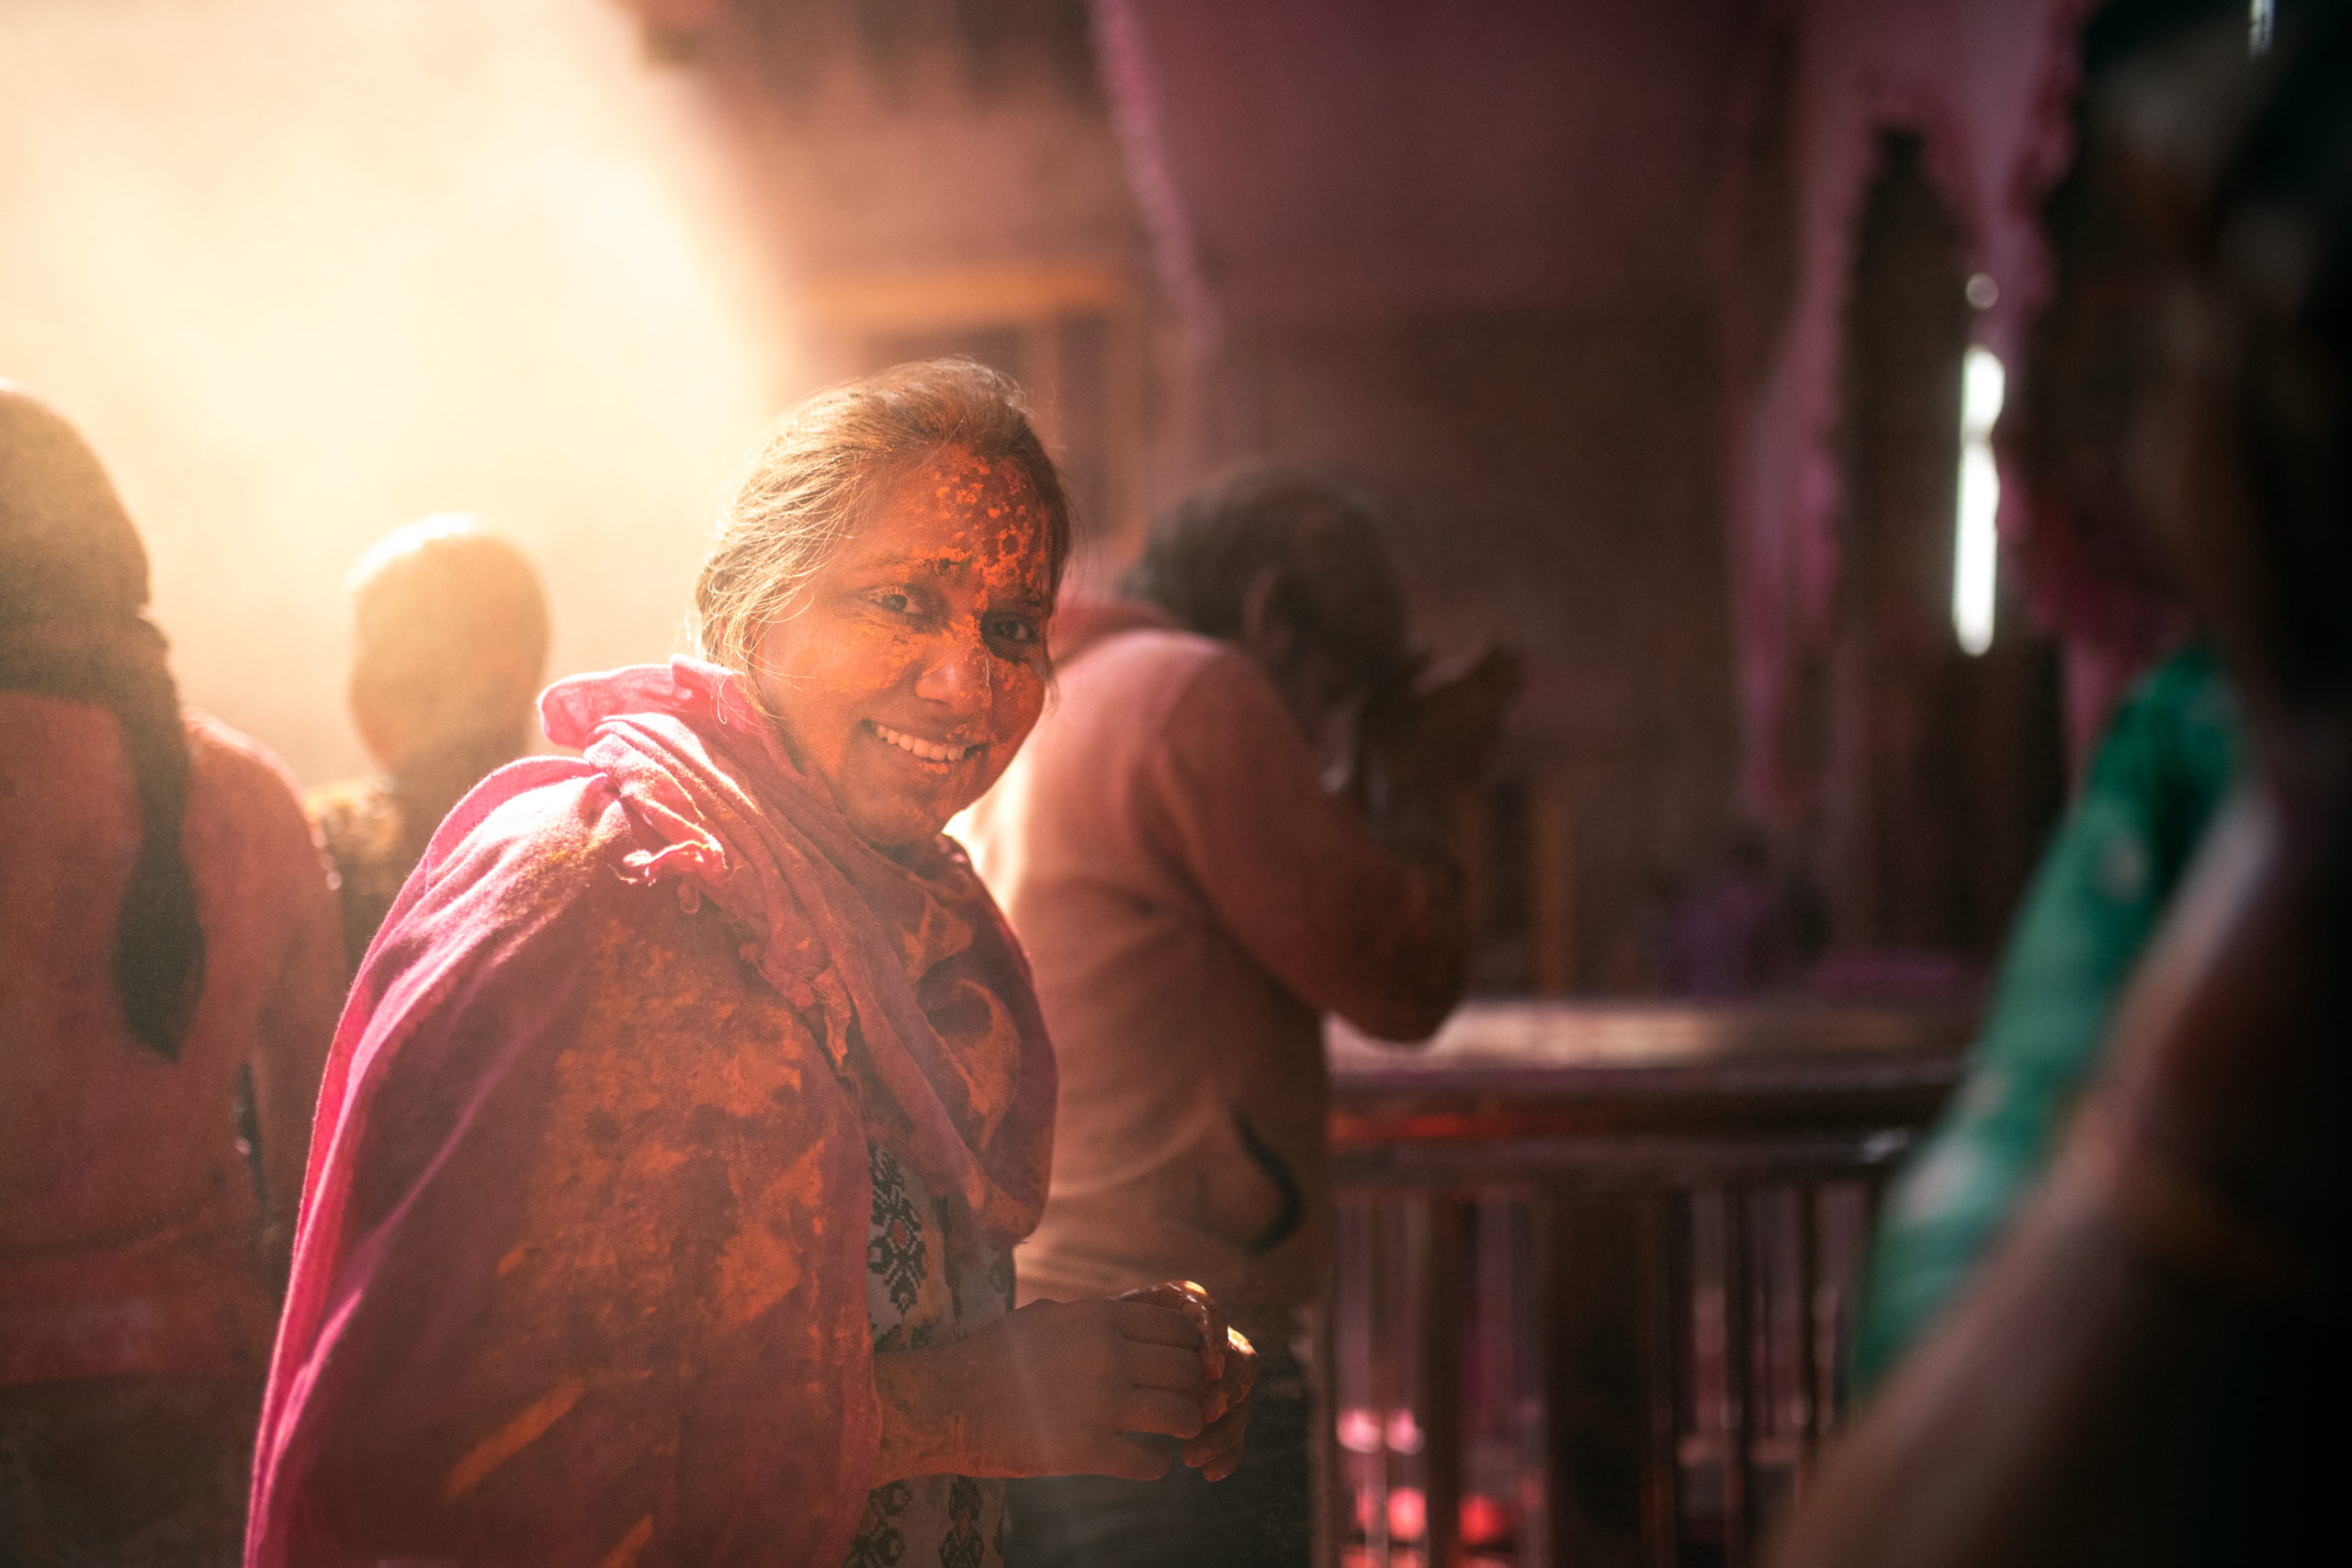 Street photography of a woman celebrating the Holi Festival in a temple in Vrindivan, India